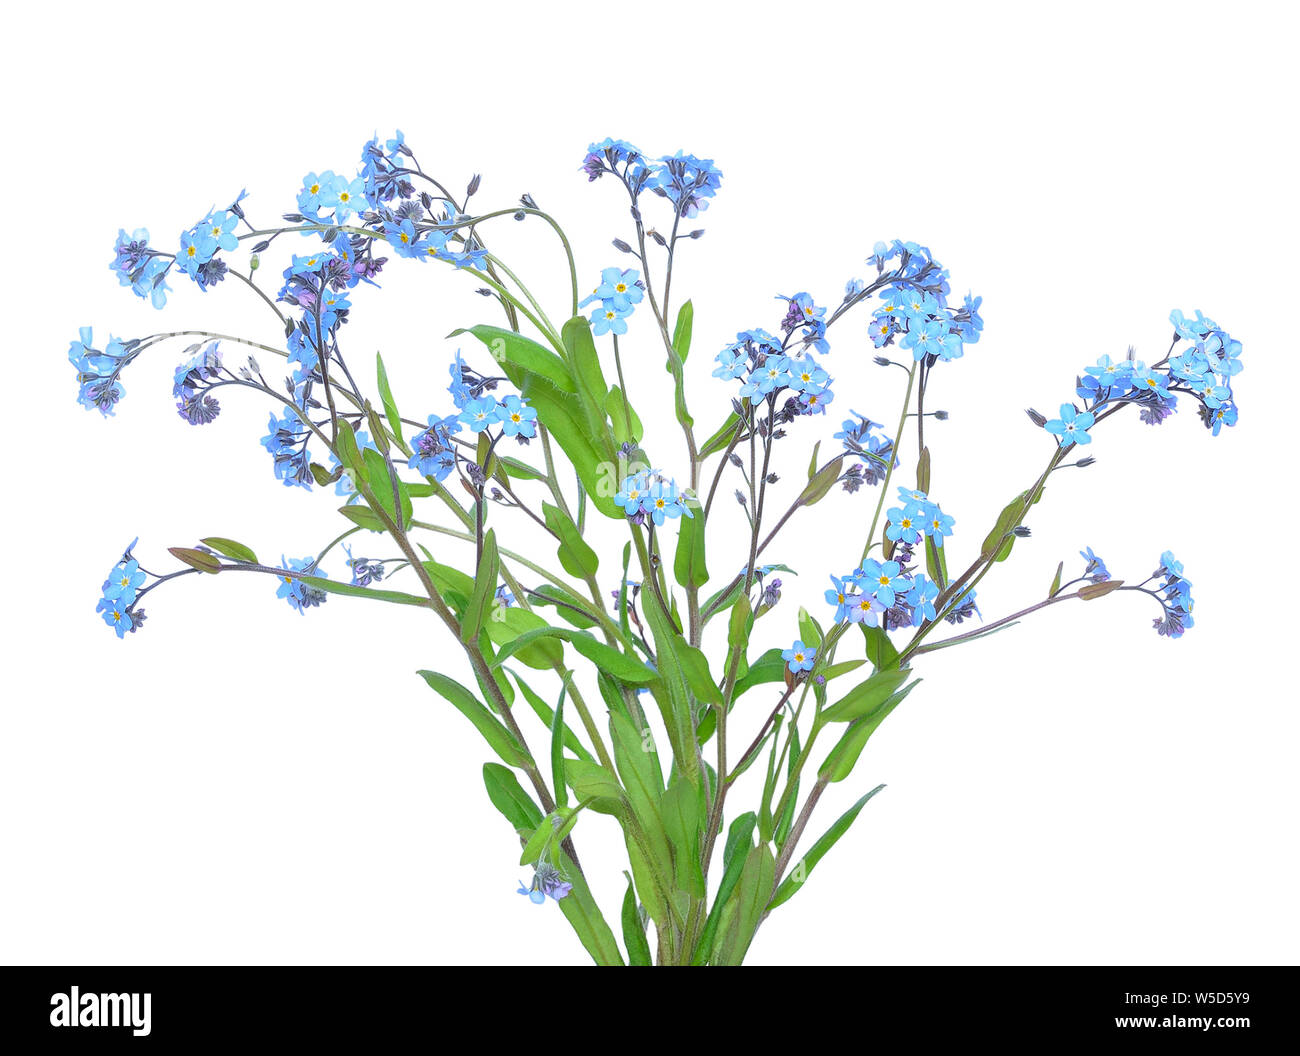 Forget-me-not flowers  isolated on white background Stock Photo